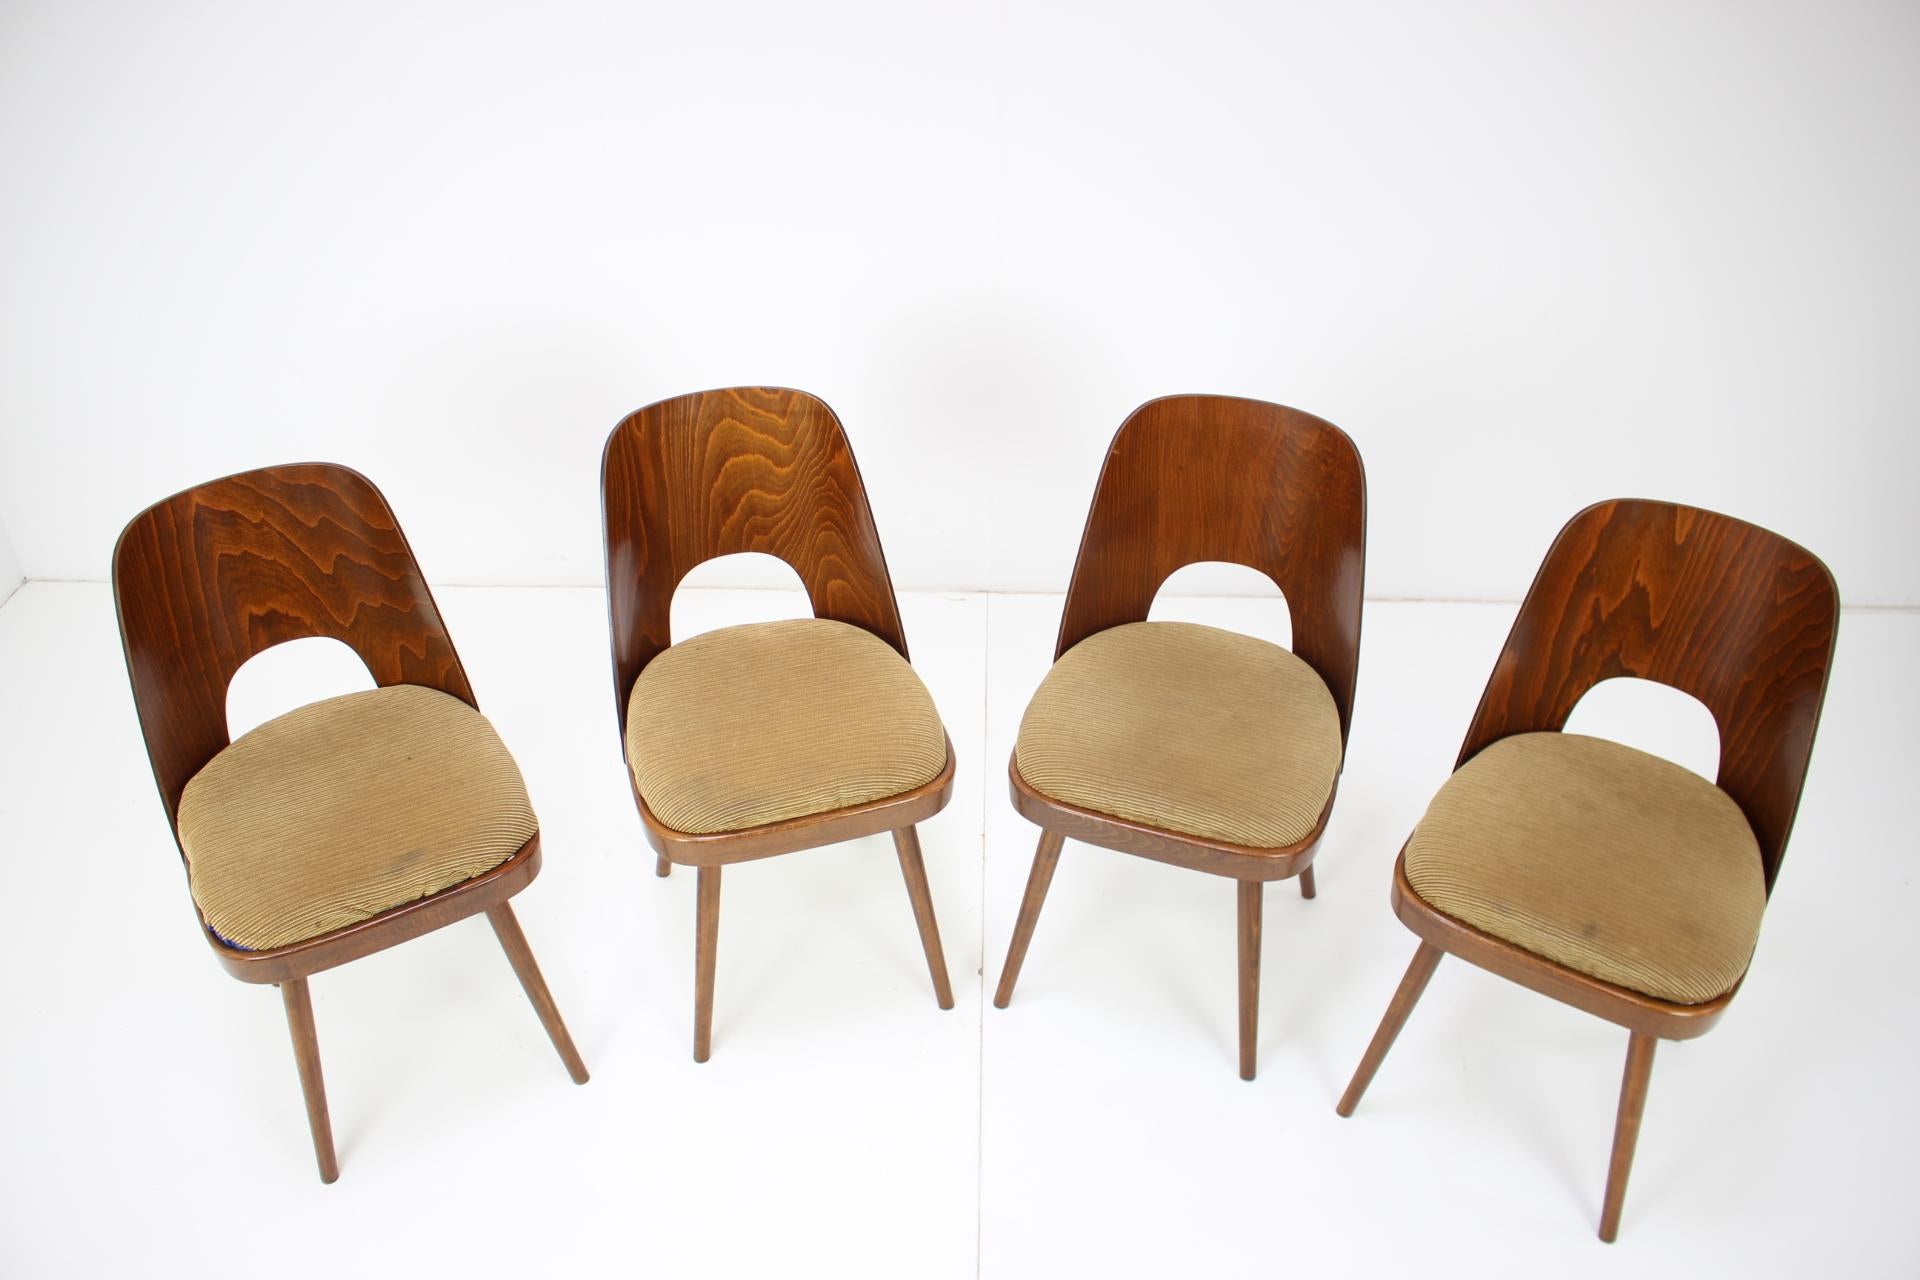 - Made in Czechoslovakia
- Made of wood, fabric
- Original upholstery
- Good, original condition.